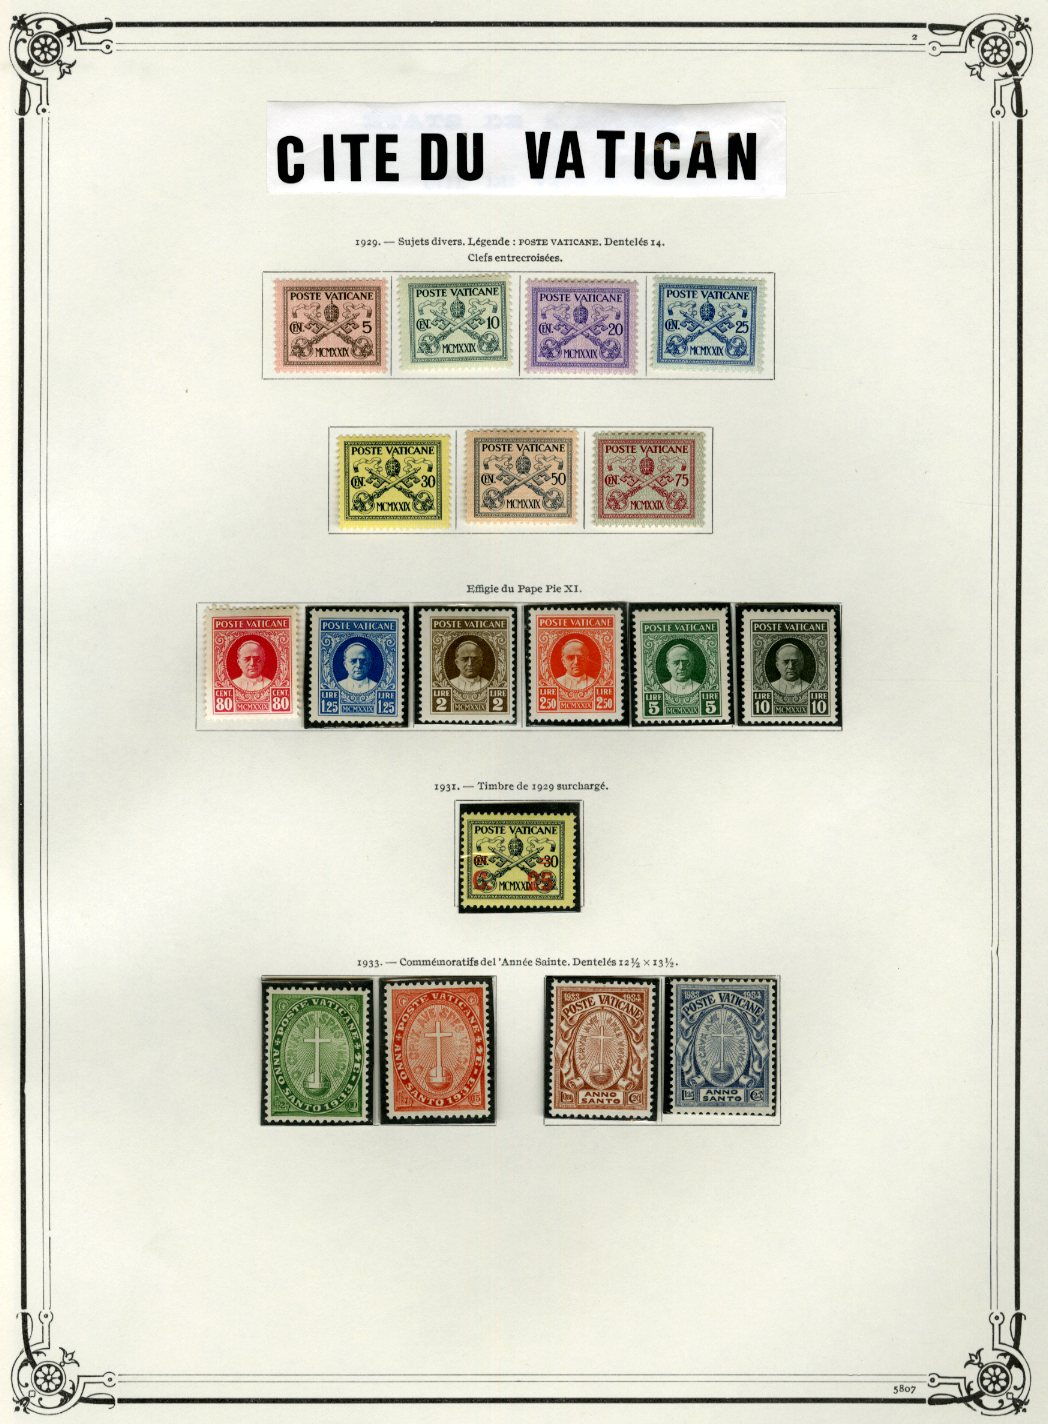 Lot 1530 - LARGE LOTS AND COLLECTIONS AUSTRALIA  -  Cherrystone Auctions Rare Stamps & Postal History of the World